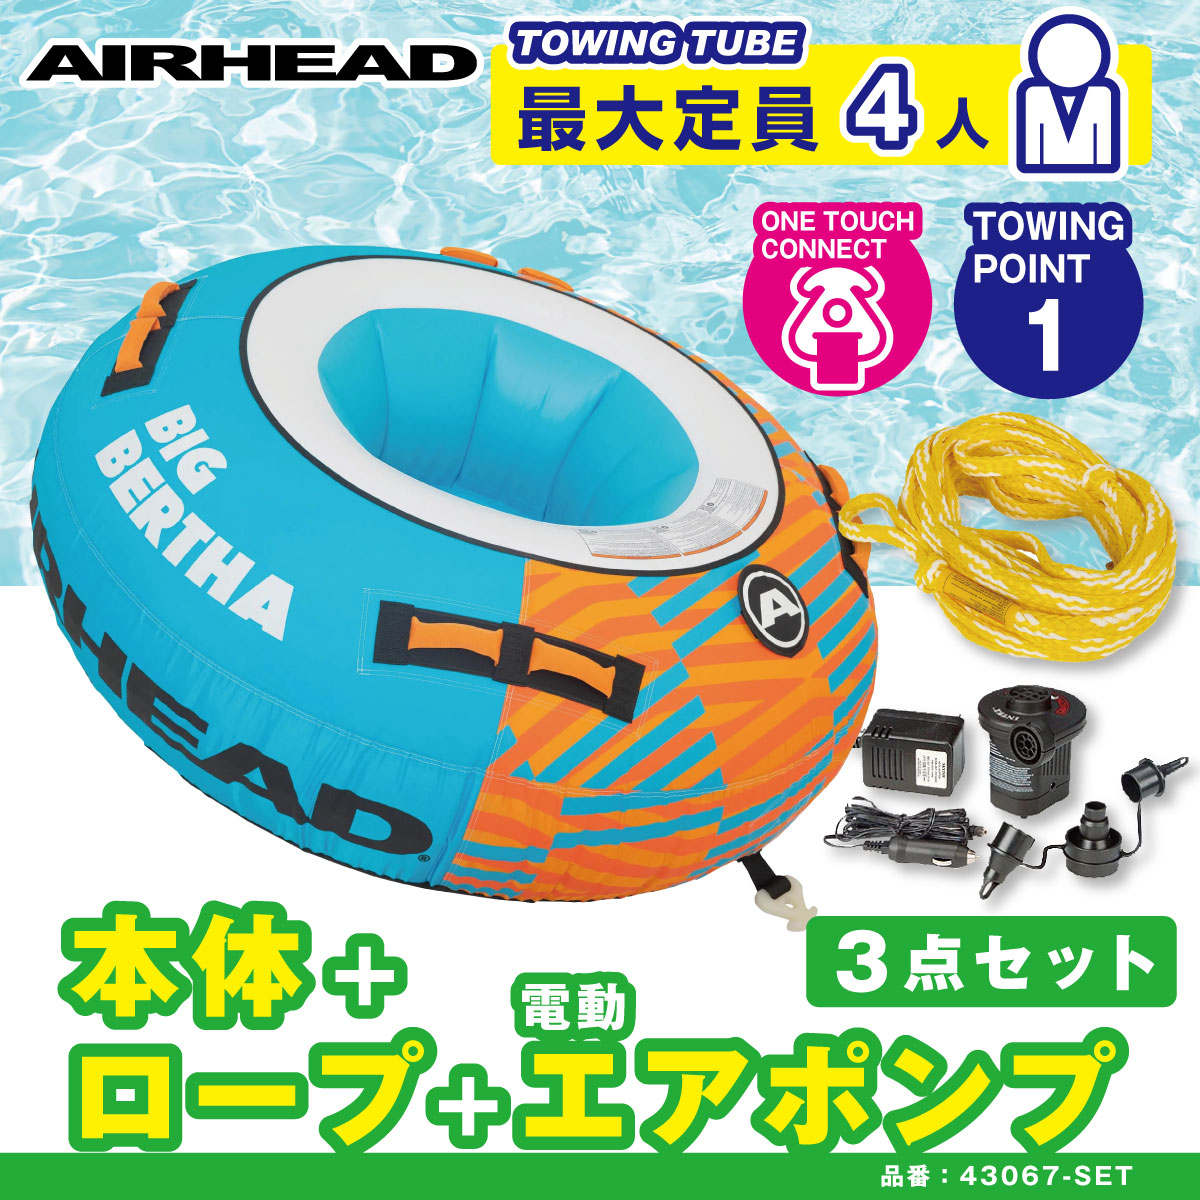 [Value set] Airhead BIGBERTHA 4 people 43067 Large water toy Banana boat Towing tube Rubber boat AIRHEAD